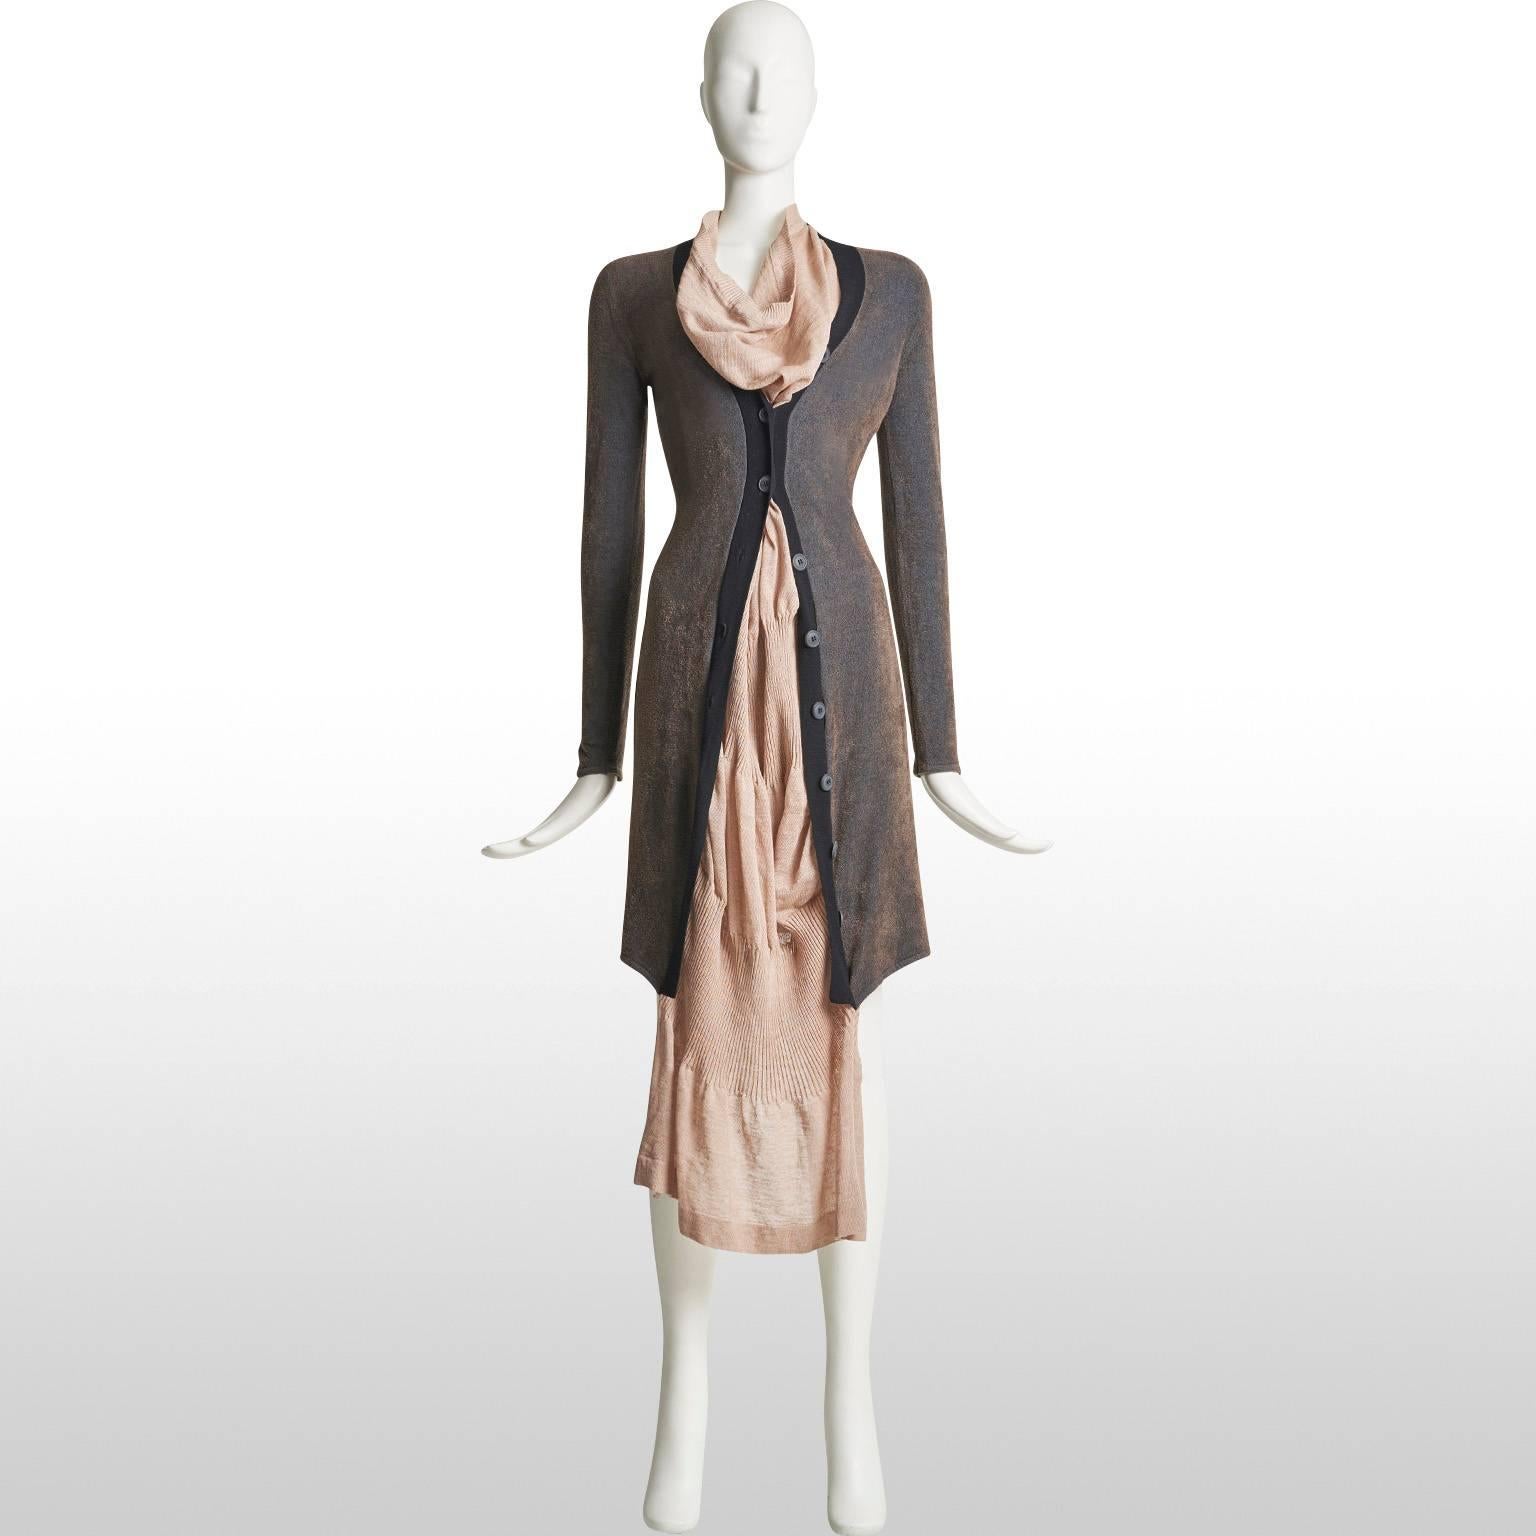 This is a cardigan dress by the designer Vivienne Westwood and is part of her Gold Label collection. The dress part of the piece is made out of linen and comes in a blush pink colour. The cardigan part is made out of a mixture of cashmere, viscose